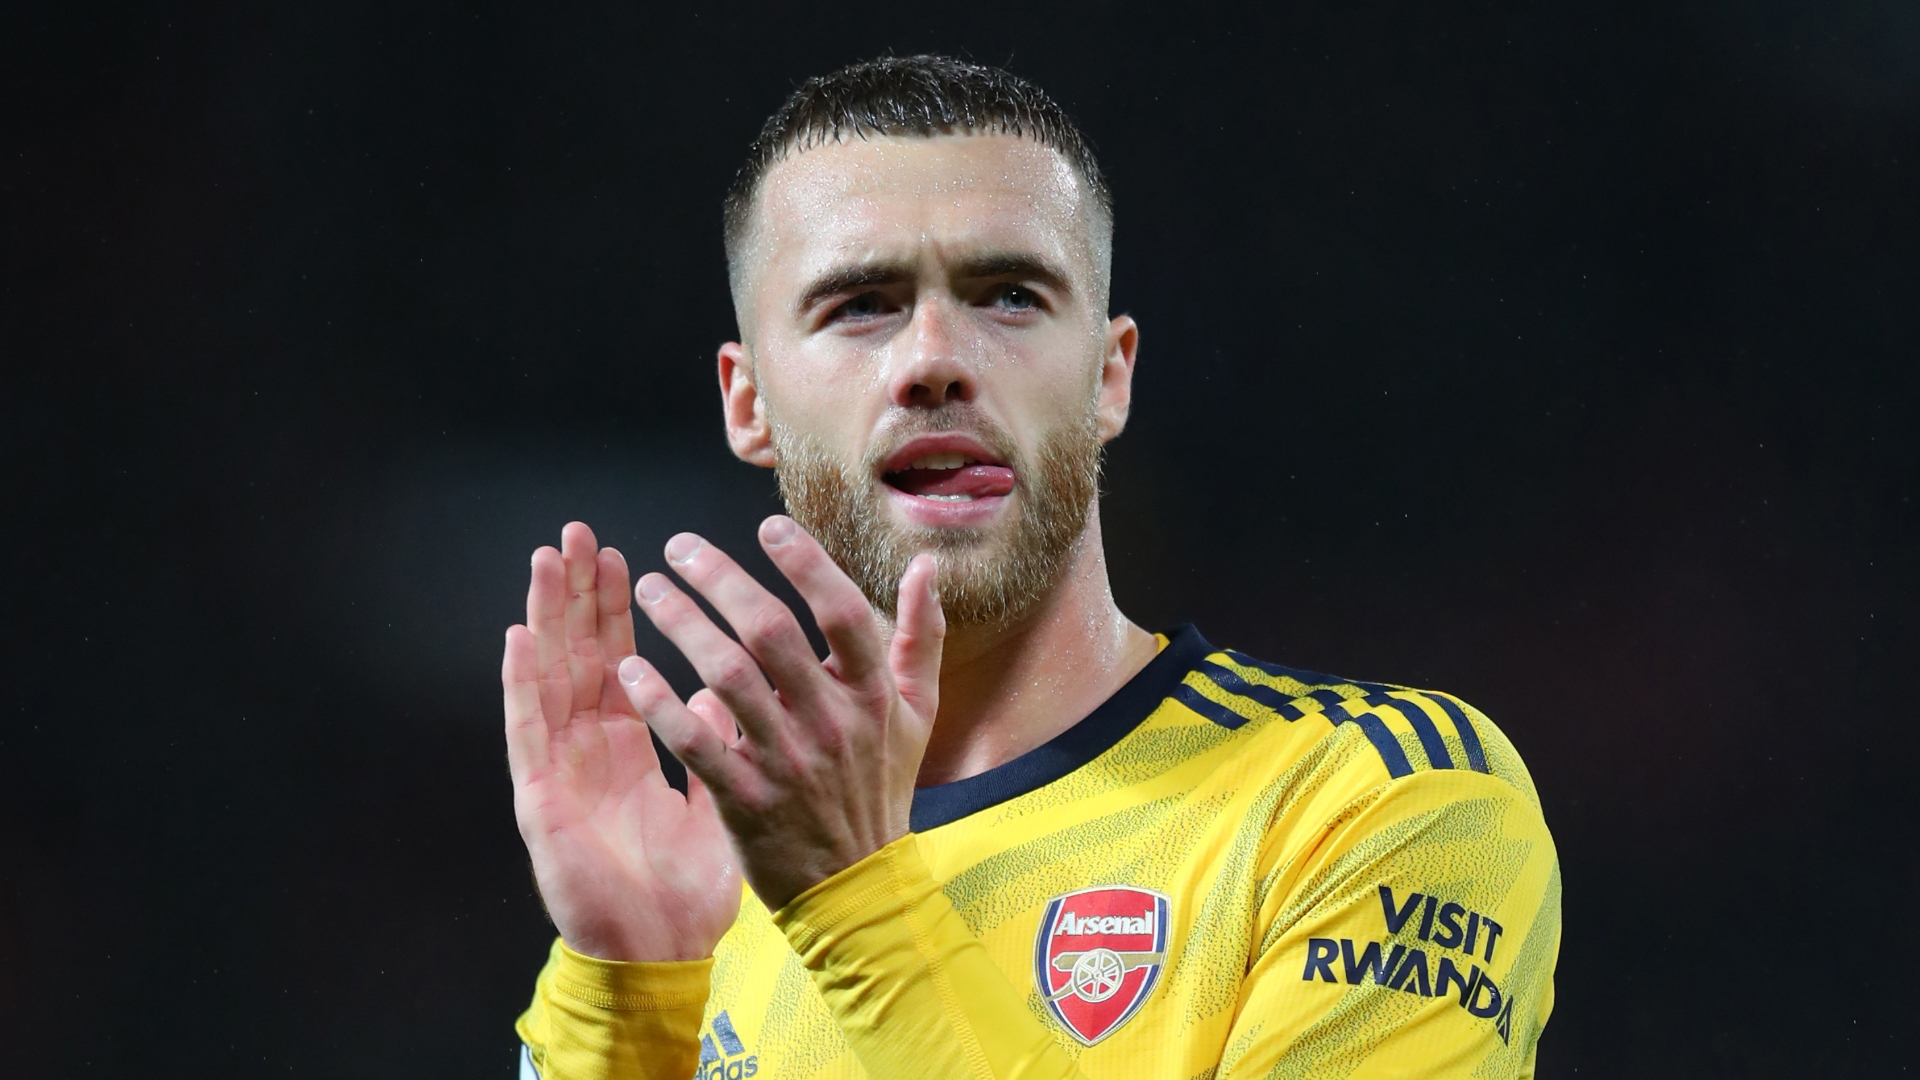 Arsenal have to keep believing in Emery's philosophy – Chambers